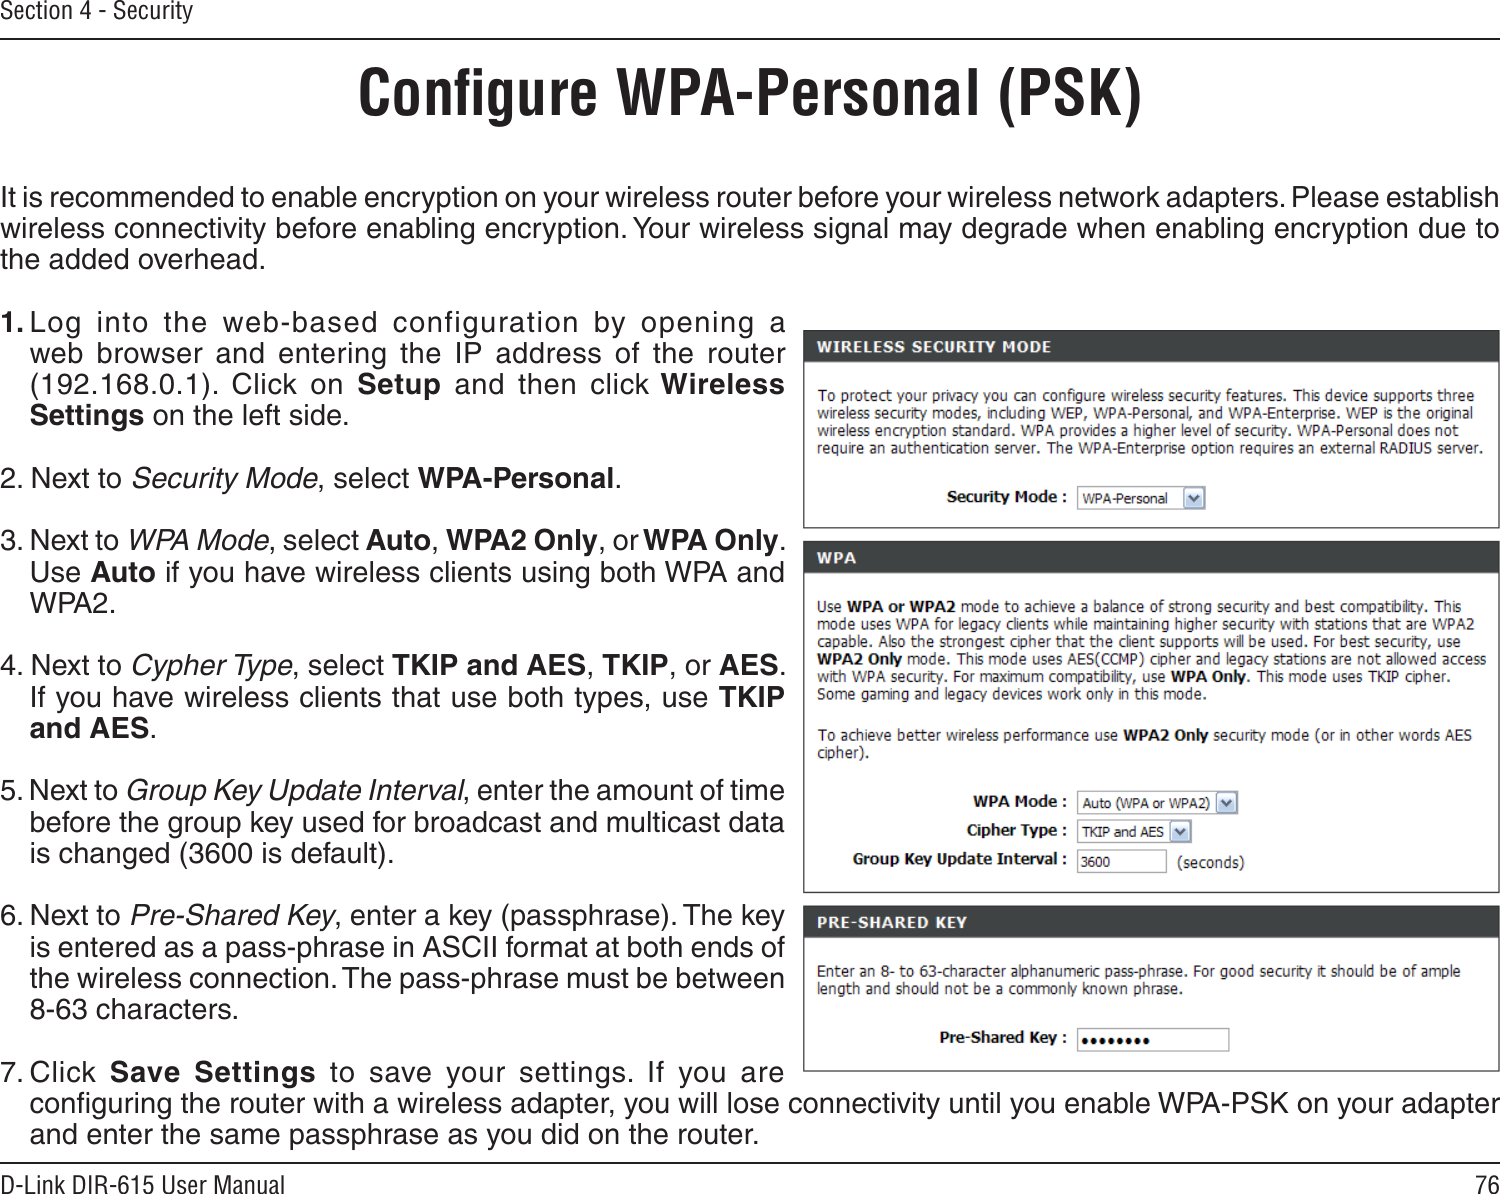 76D-Link DIR-615 User ManualSection 4 - SecurityConﬁgure WPA-Personal (PSK)It is recommended to enable encryption on your wireless router before your wireless network adapters. Please establish wireless connectivity before enabling encryption. Your wireless signal may degrade when enabling encryption due to the added overhead.1. Log  into  the  web-based  configuration  by  opening  a web  browser  and  entering  the  IP  address  of  the  router (192.168.0.1).  Click  on  Setup  and  then  click Wireless Settings on the left side.2. Next to Security Mode, select WPA-Personal.3. Next to WPA Mode, select Auto, WPA2 Only, or WPA Only. Use Auto if you have wireless clients using both WPA and WPA2.4. Next to Cypher Type, select TKIP and AES, TKIP, or AES. If you have wireless clients that use both types, use TKIP and AES.5. Next to Group Key Update Interval, enter the amount of time before the group key used for broadcast and multicast data is changed (3600 is default).6. Next to Pre-Shared Key, enter a key (passphrase). The key is entered as a pass-phrase in ASCII format at both ends of the wireless connection. The pass-phrase must be between 8-63 characters. 7. Click  Save  Settings  to  save  your  settings.  If  you  are conﬁguring the router with a wireless adapter, you will lose connectivity until you enable WPA-PSK on your adapter and enter the same passphrase as you did on the router.